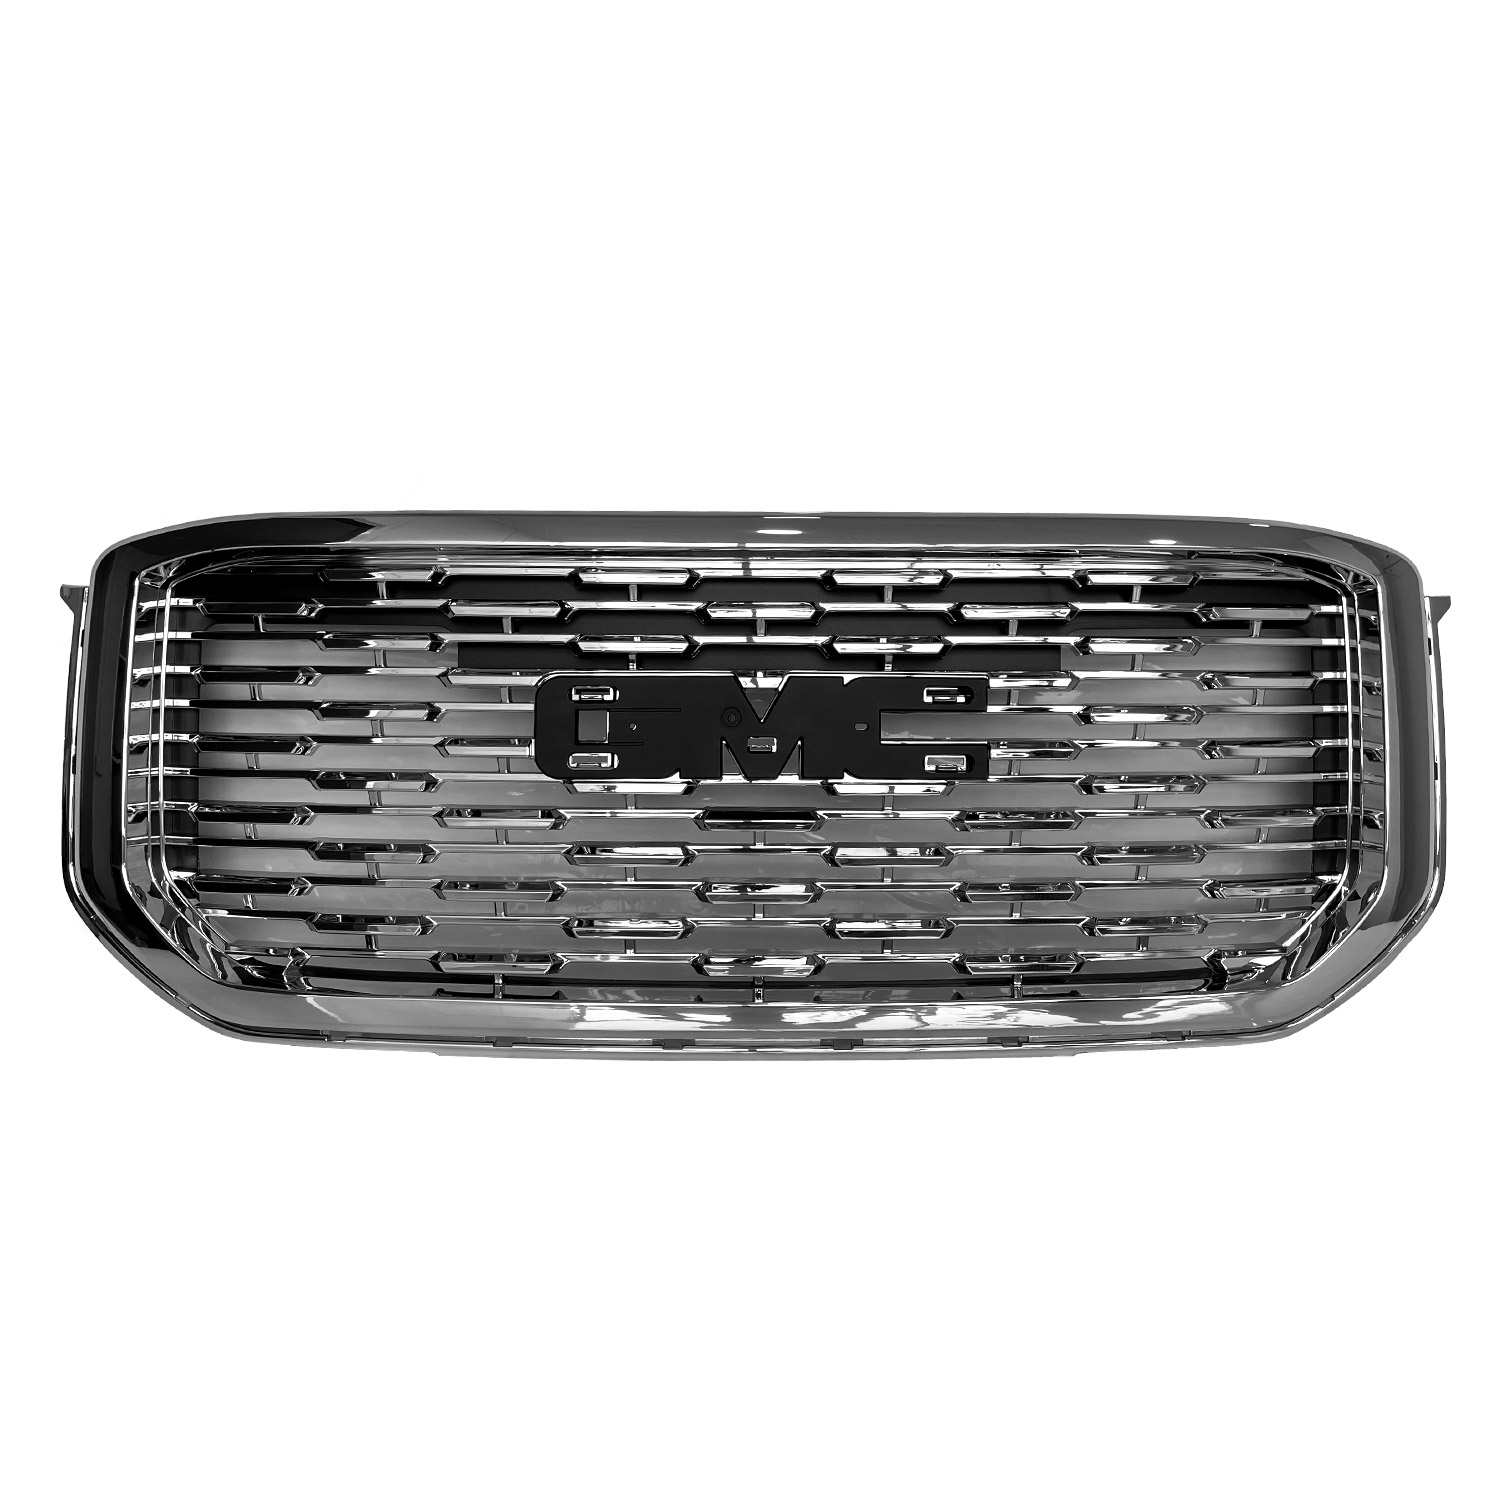 Vicrez replacement front upper grille GMC yukon